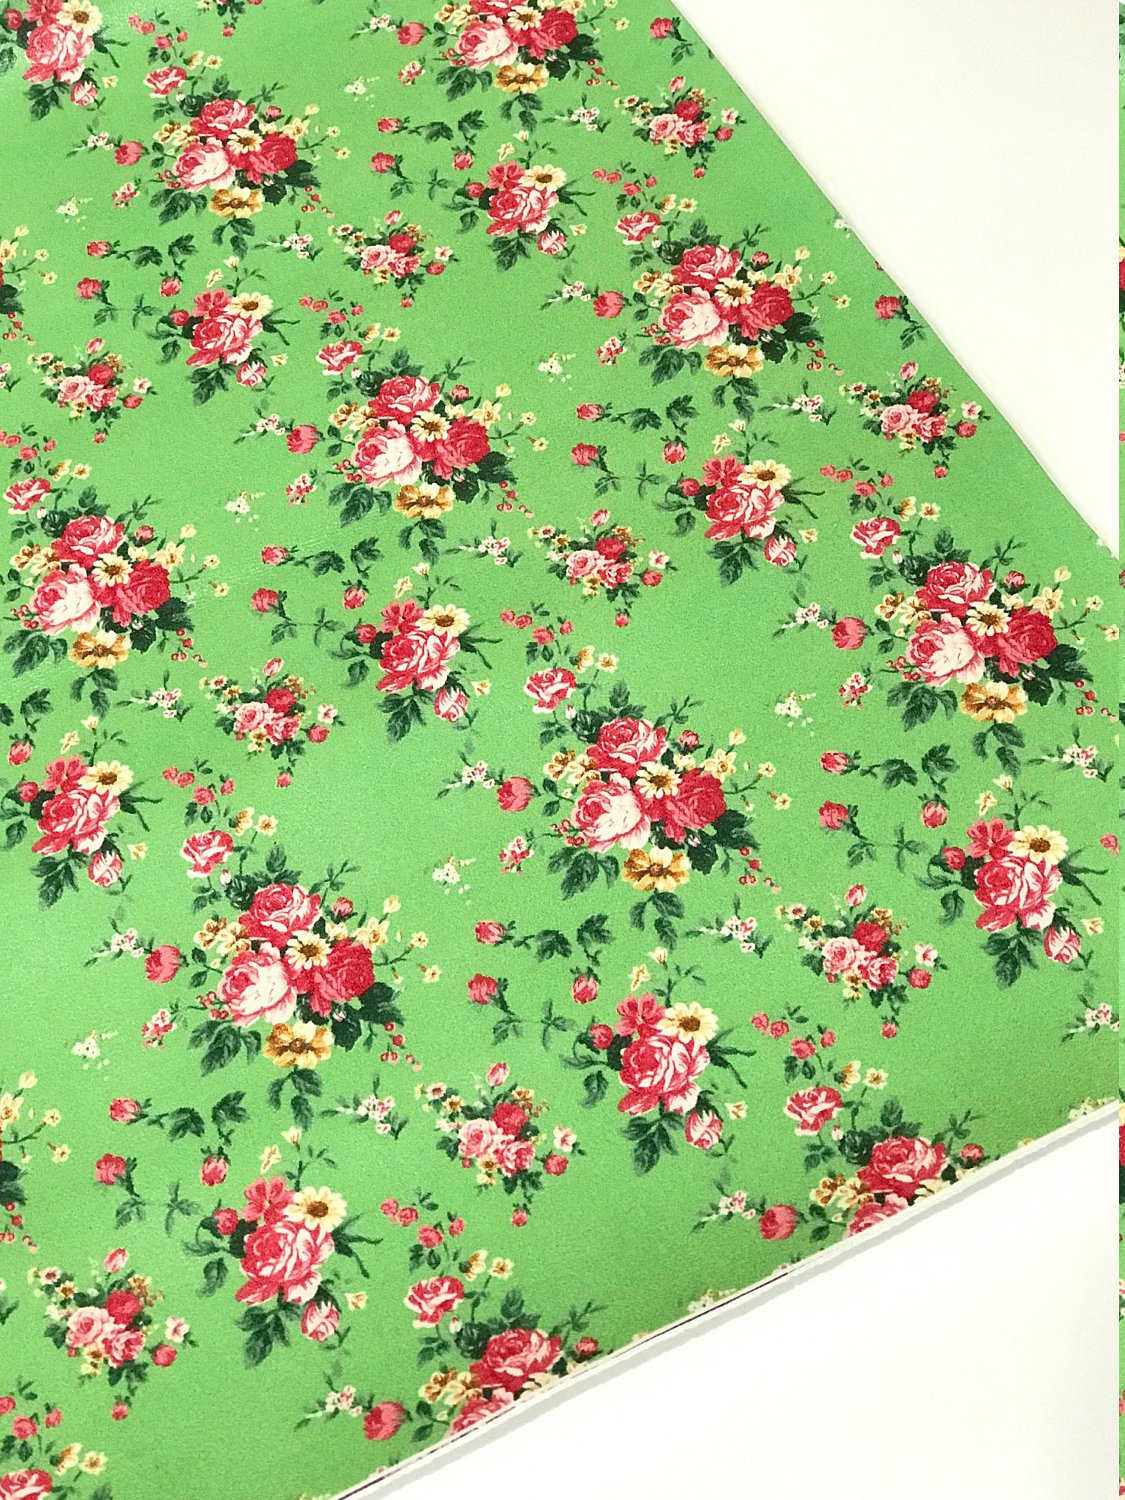 Pink Floral Roses in Green Soft Leatherette 0.9 mm Thick Floral PU Leather A4 Sheet 210 x 297mm Floral Leather Bows Floral Leather Headbands